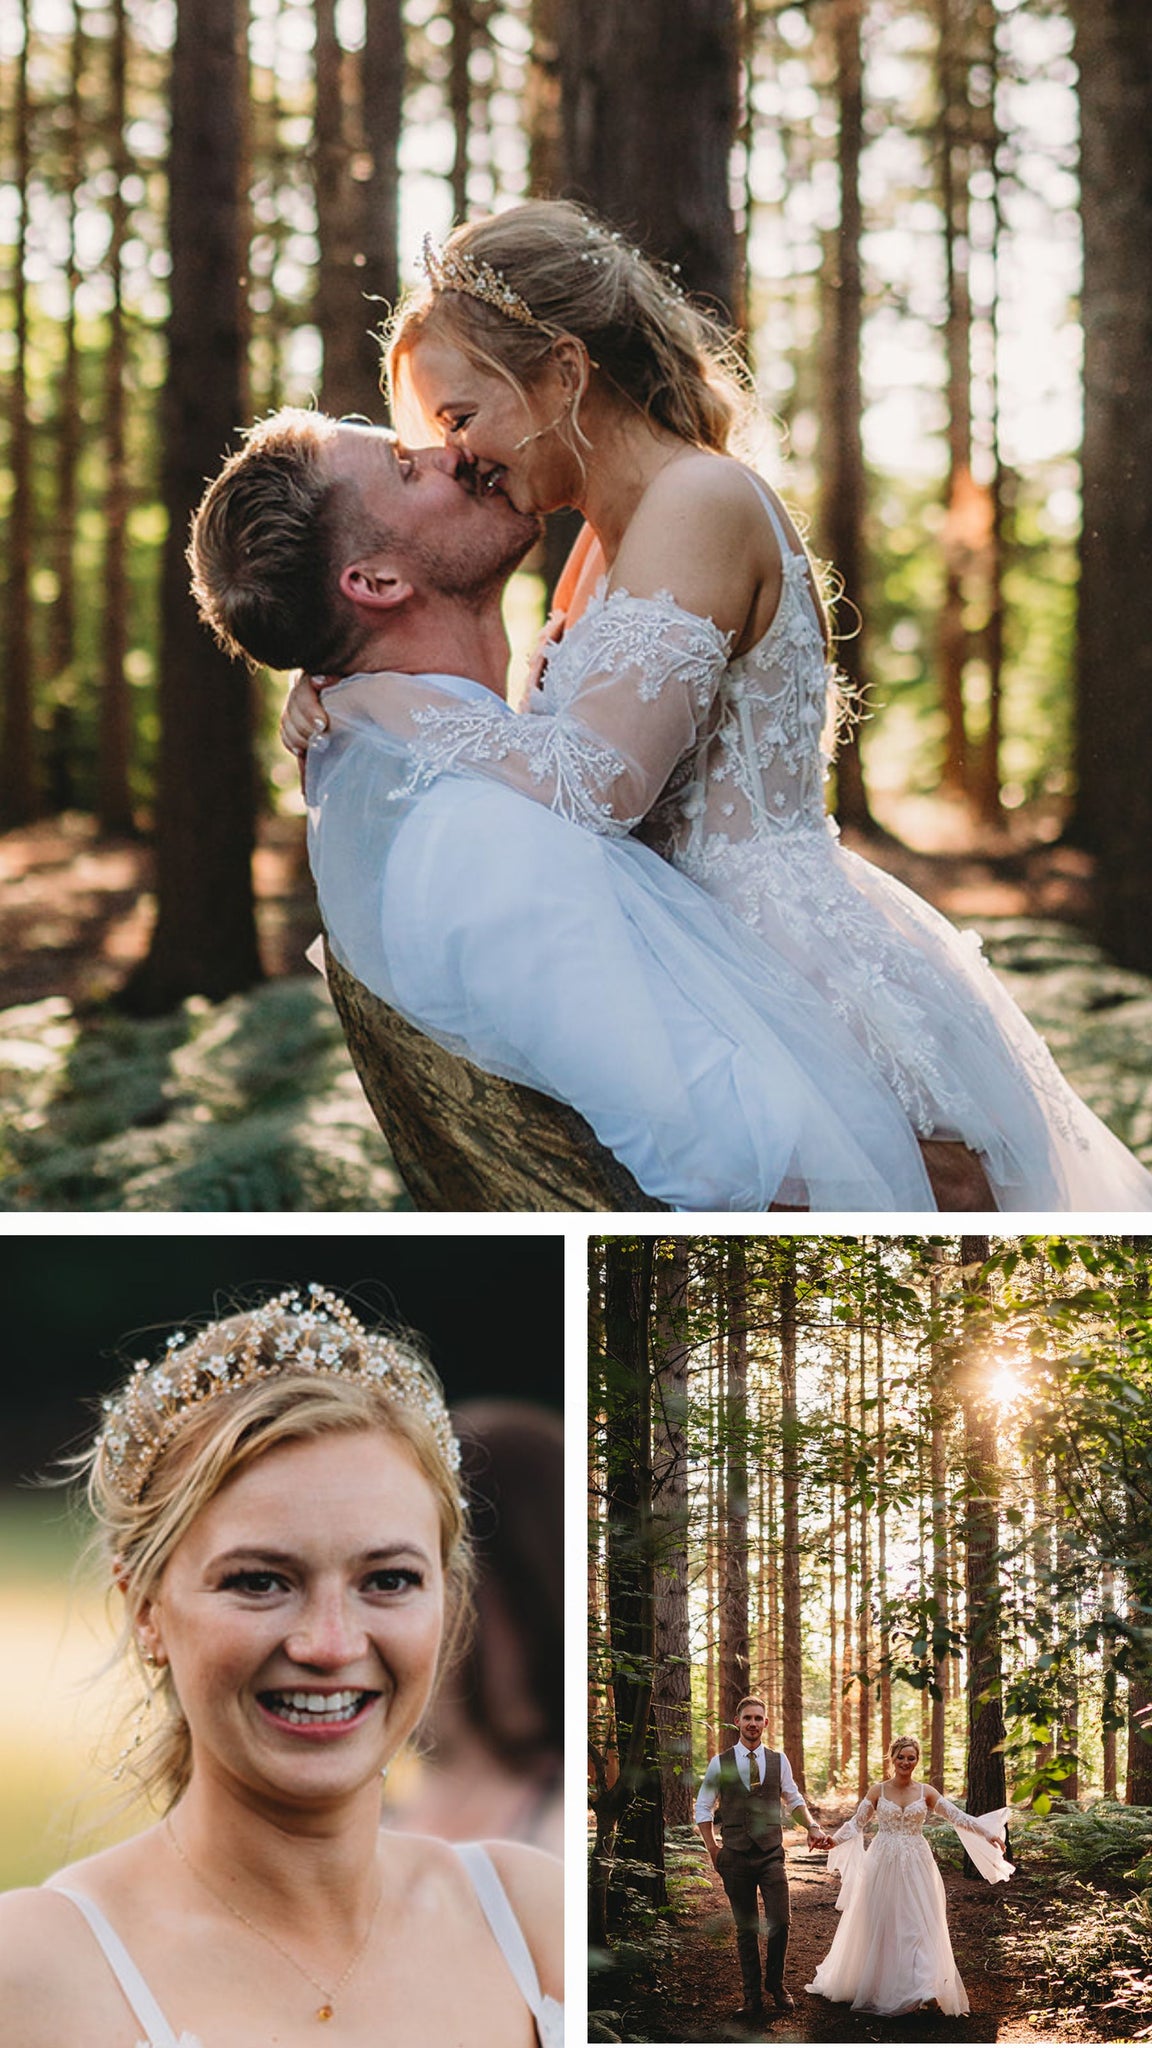 A fairytale forest wedding at Camp Katur